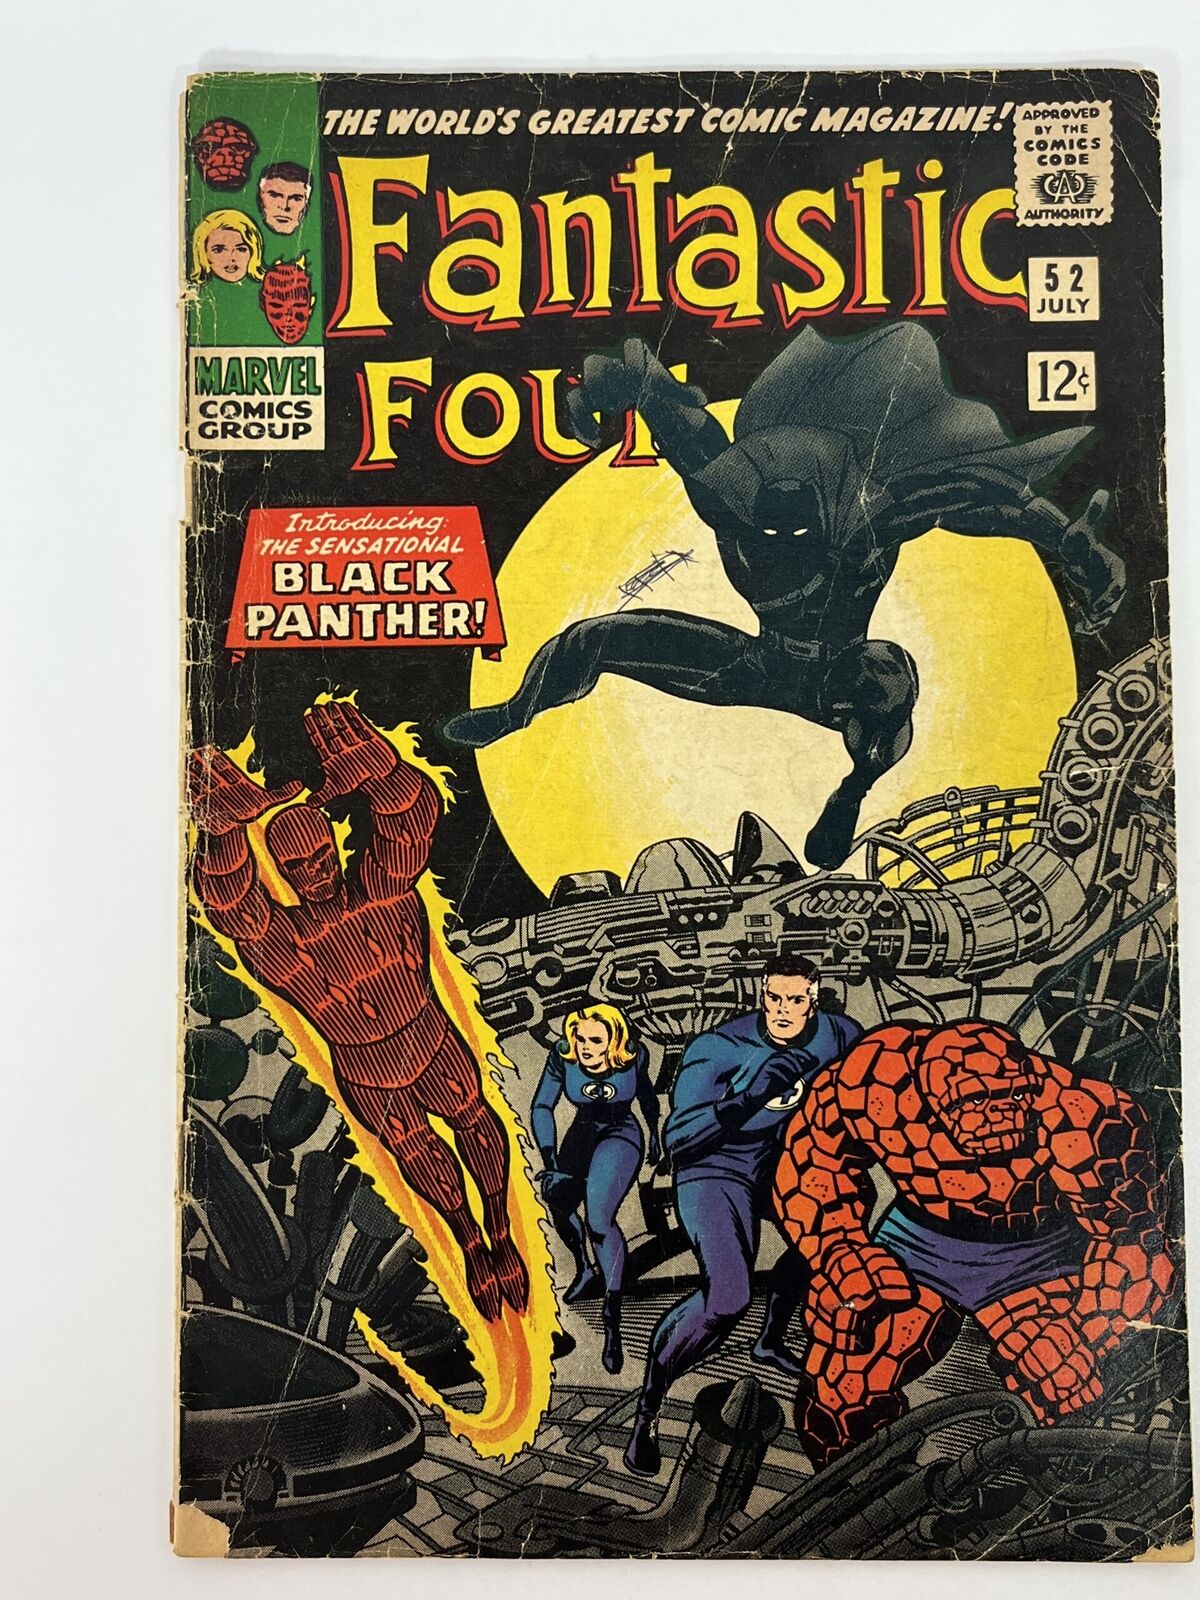 Fantastic Four #52 (1966) 1st app. of Black Panther in 2.0 Good